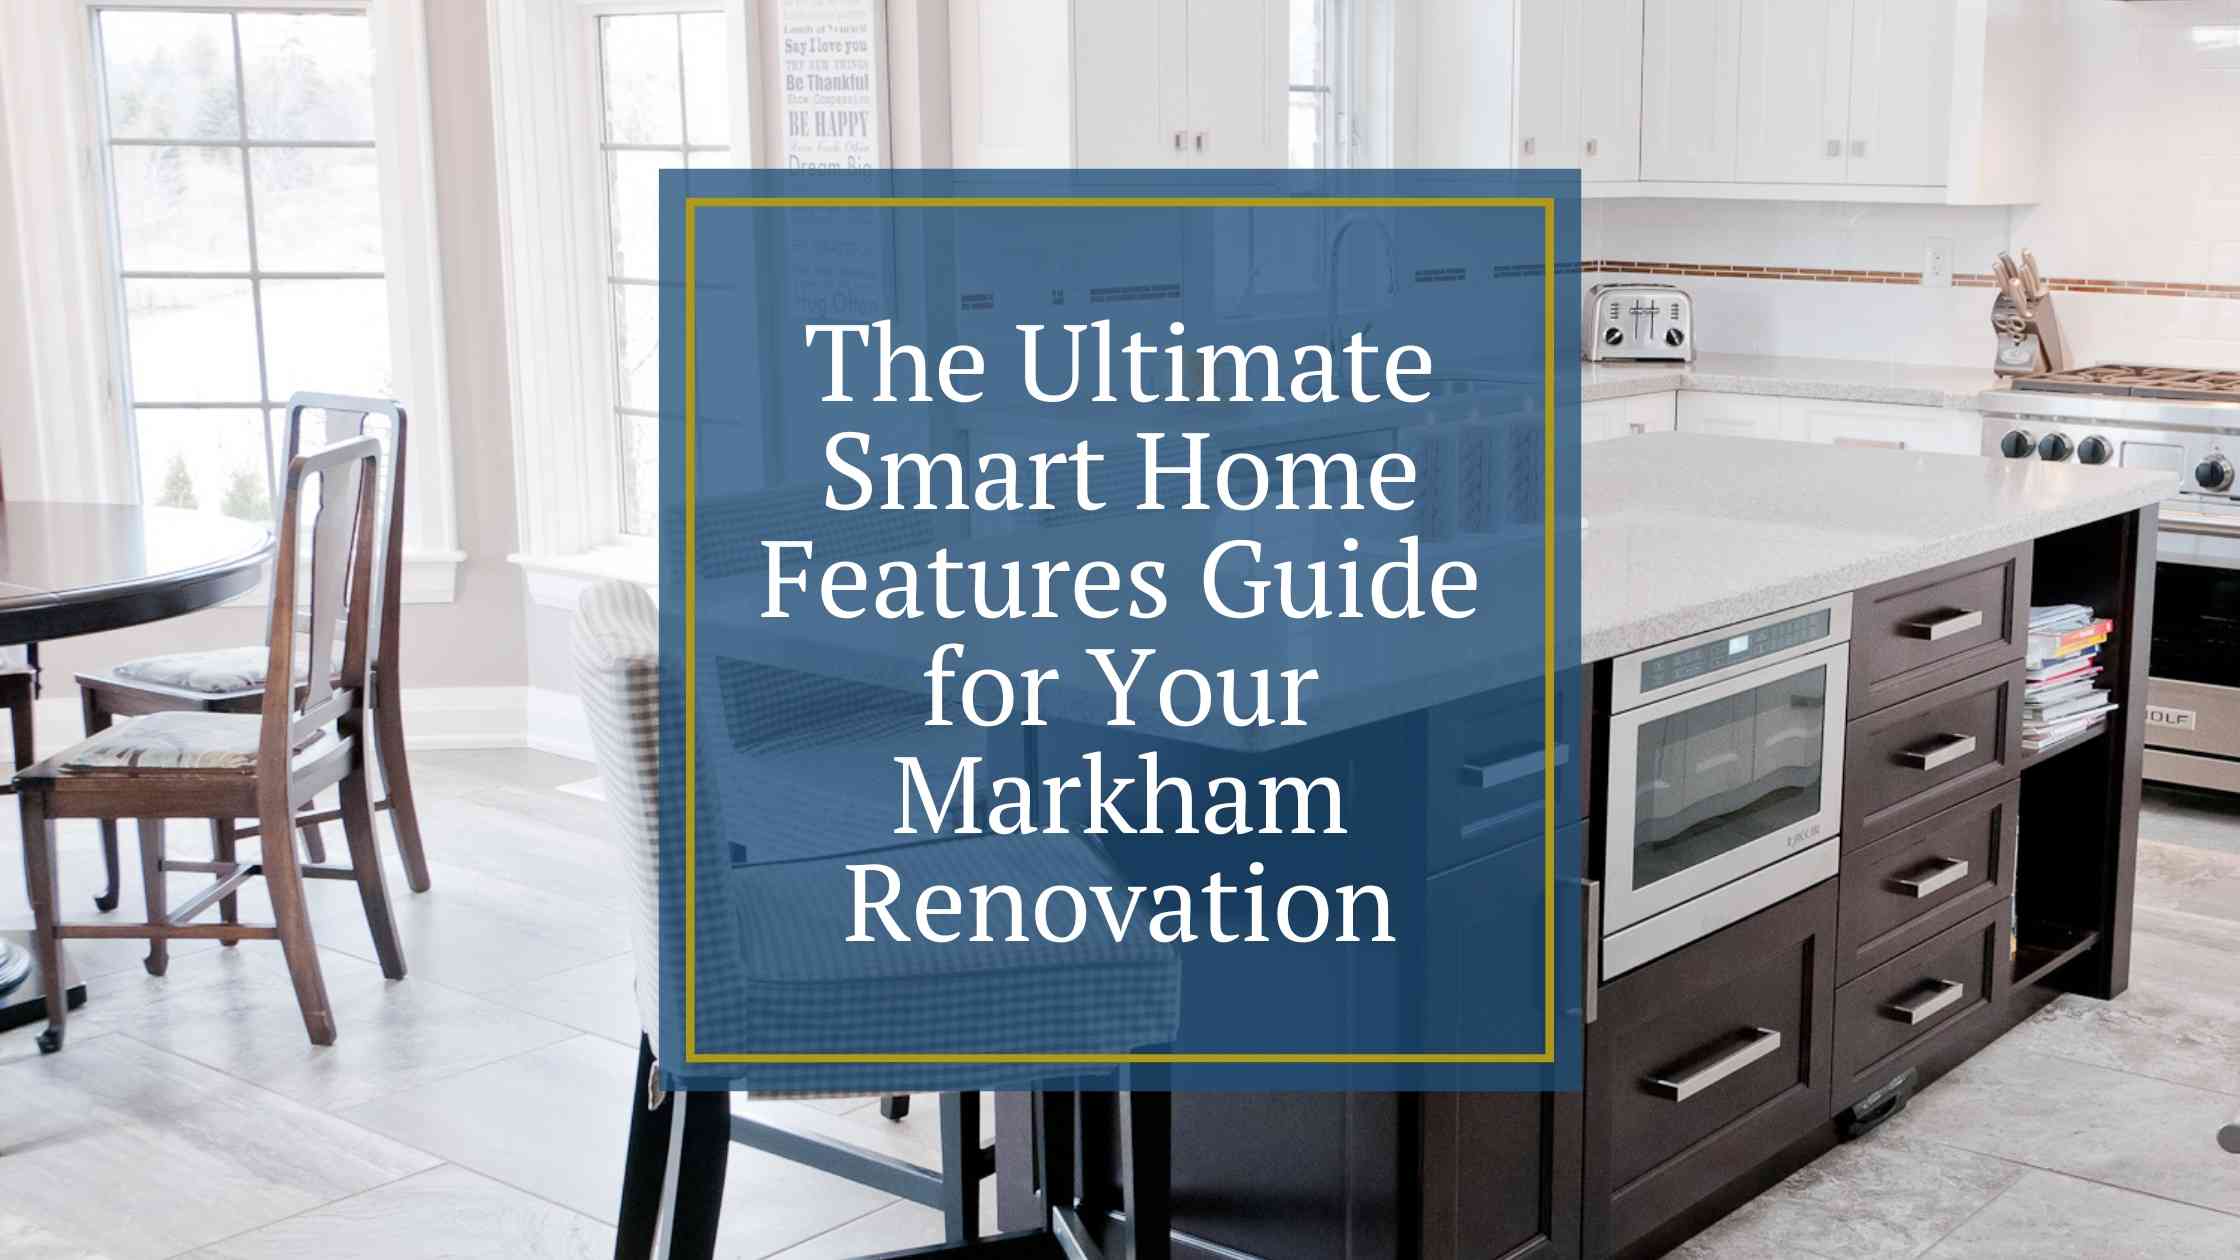 The Ultimate Smart Home Features Guide for Your Markham Renovation